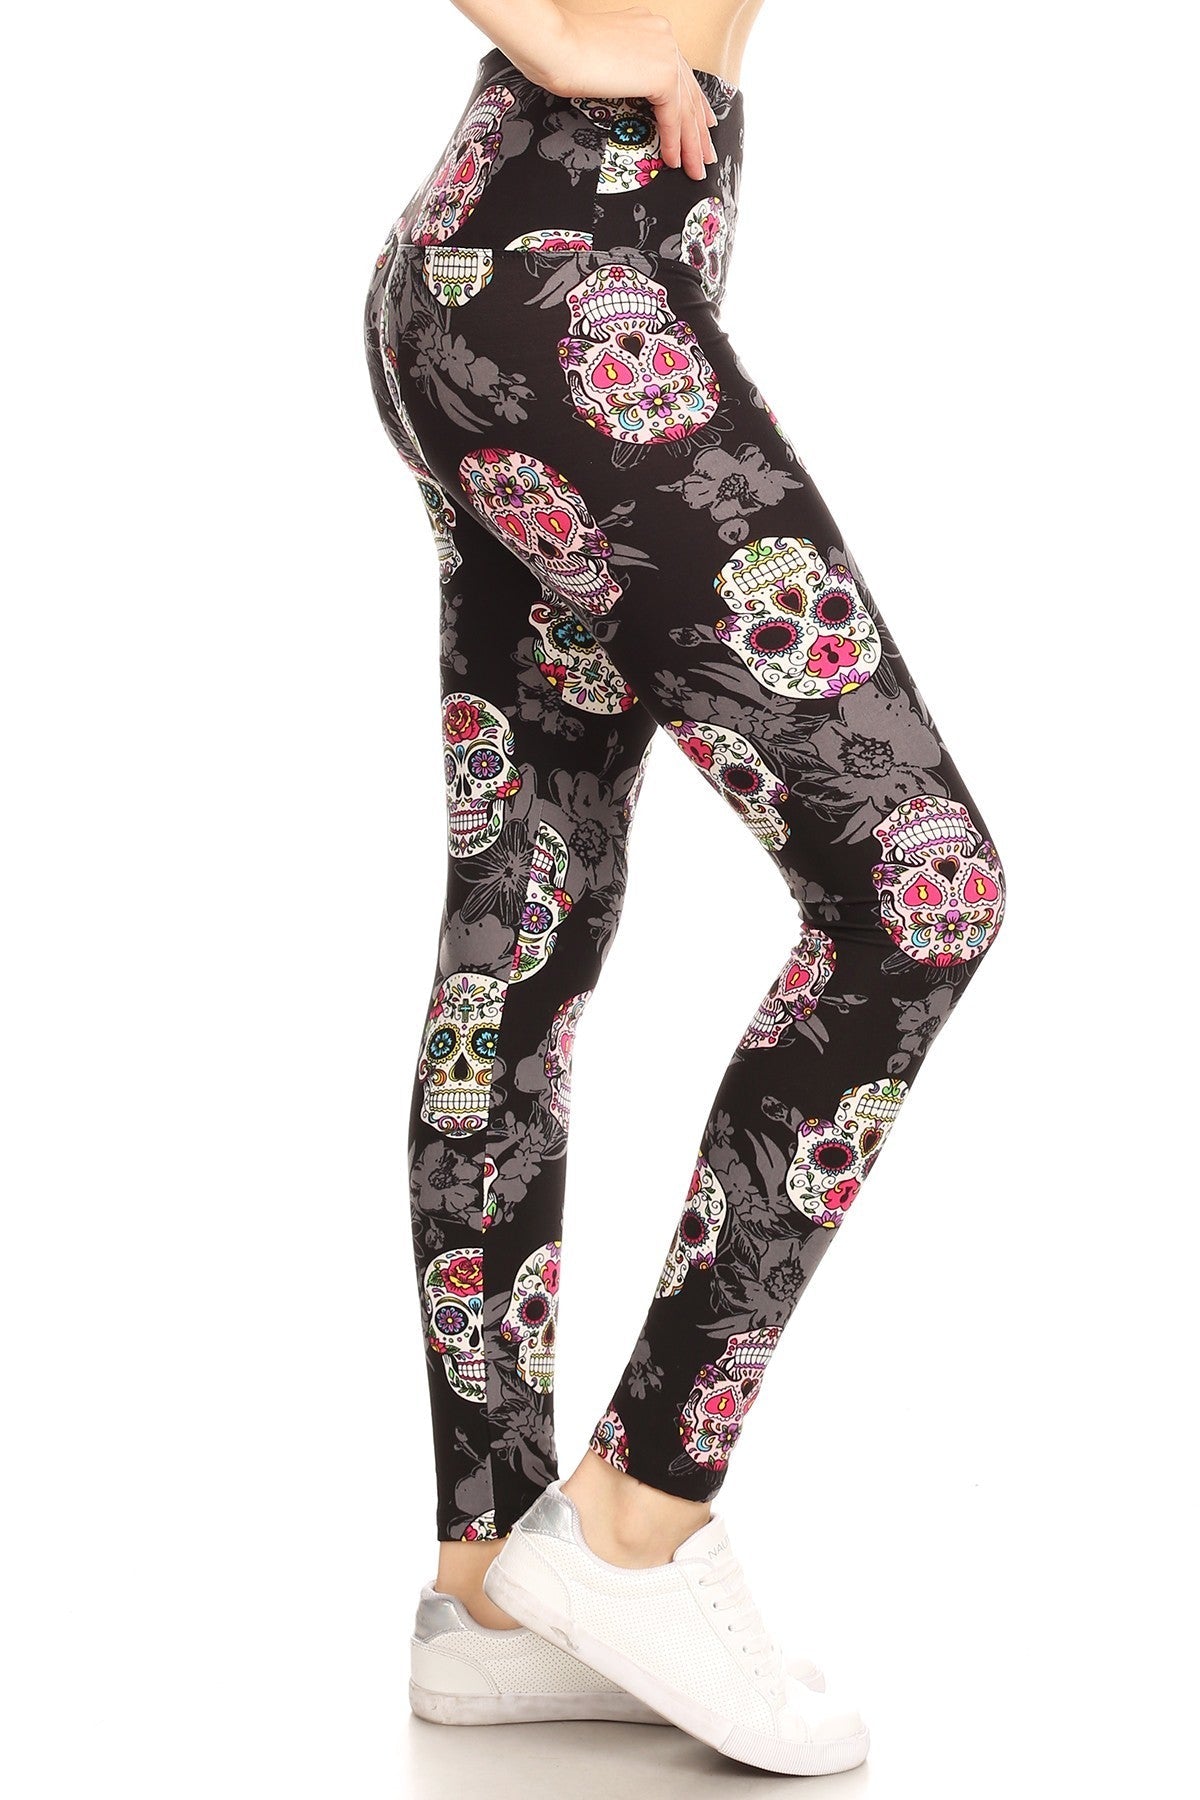 5-inch Long Yoga Style Banded Lined Skull Printed Knit Legging With High Waist-TOPS / DRESSES-[Adult]-[Female]-Multi-Blue Zone Planet